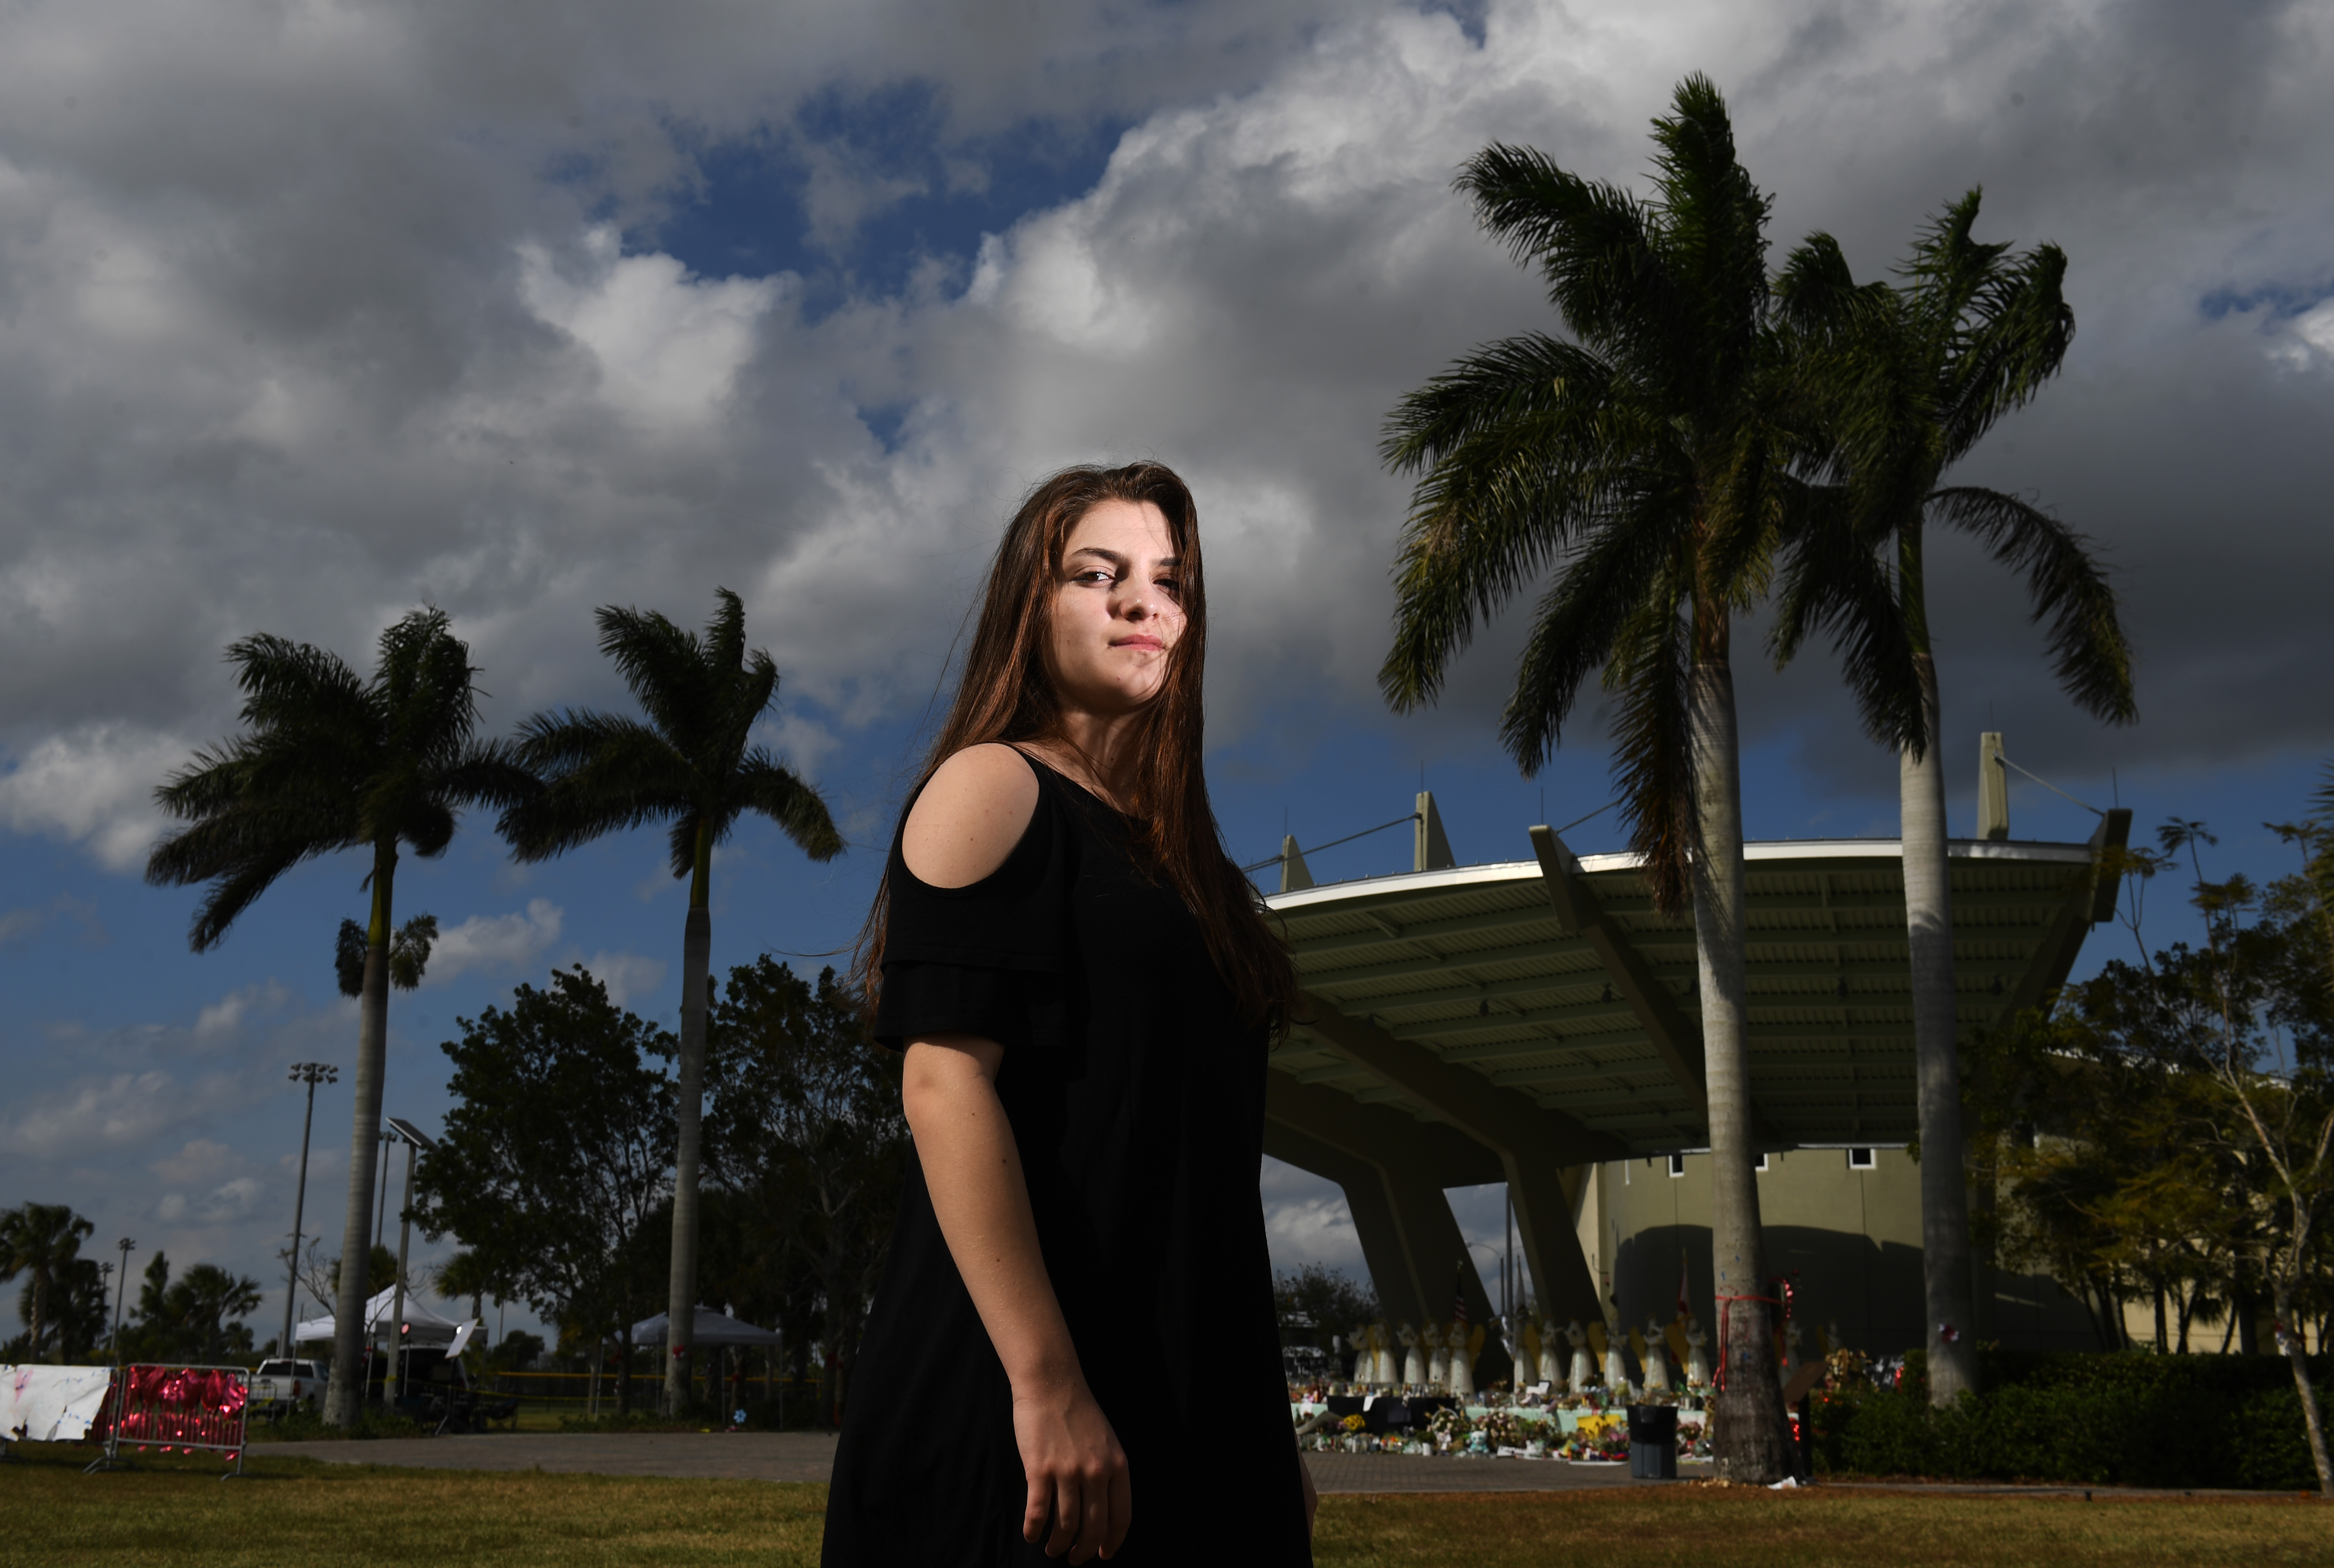 Marjory Stoneman Douglas High School student Rebecca Schneid, co-editor in chief of The Eagle Eye, the school’s newspaper, in Parkland, Florida in February 2018. Appearing on CNN in March, Schneid told host Brian Stelter that she considers journalism a form of activism